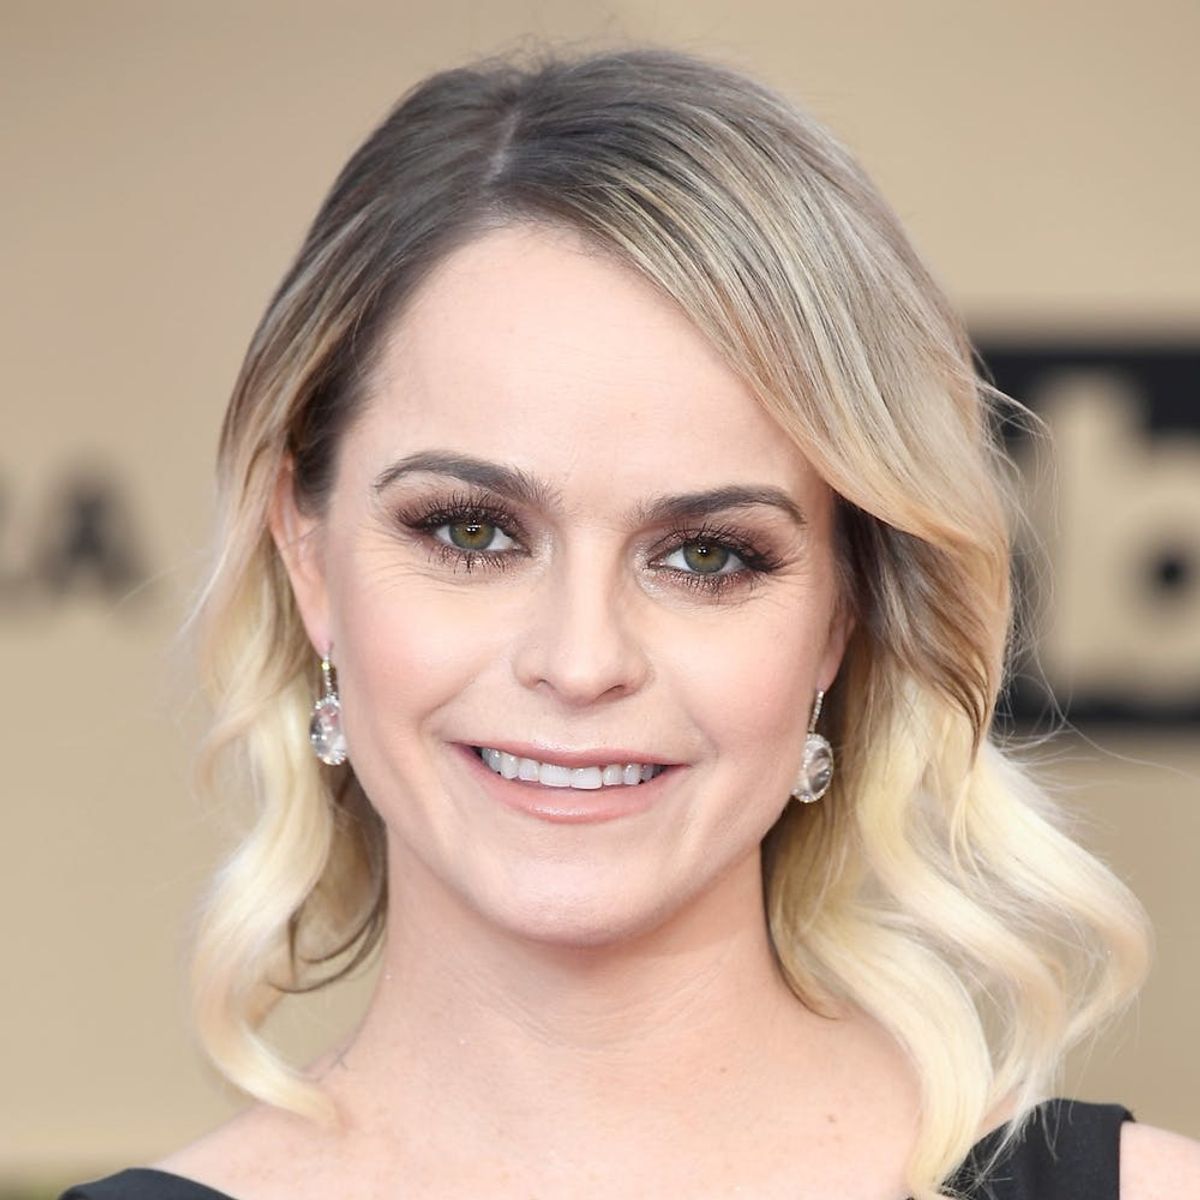 Why ‘OITNB’ Star Taryn Manning’s $200 SAG Awards Gown Is Causing Major Controversy